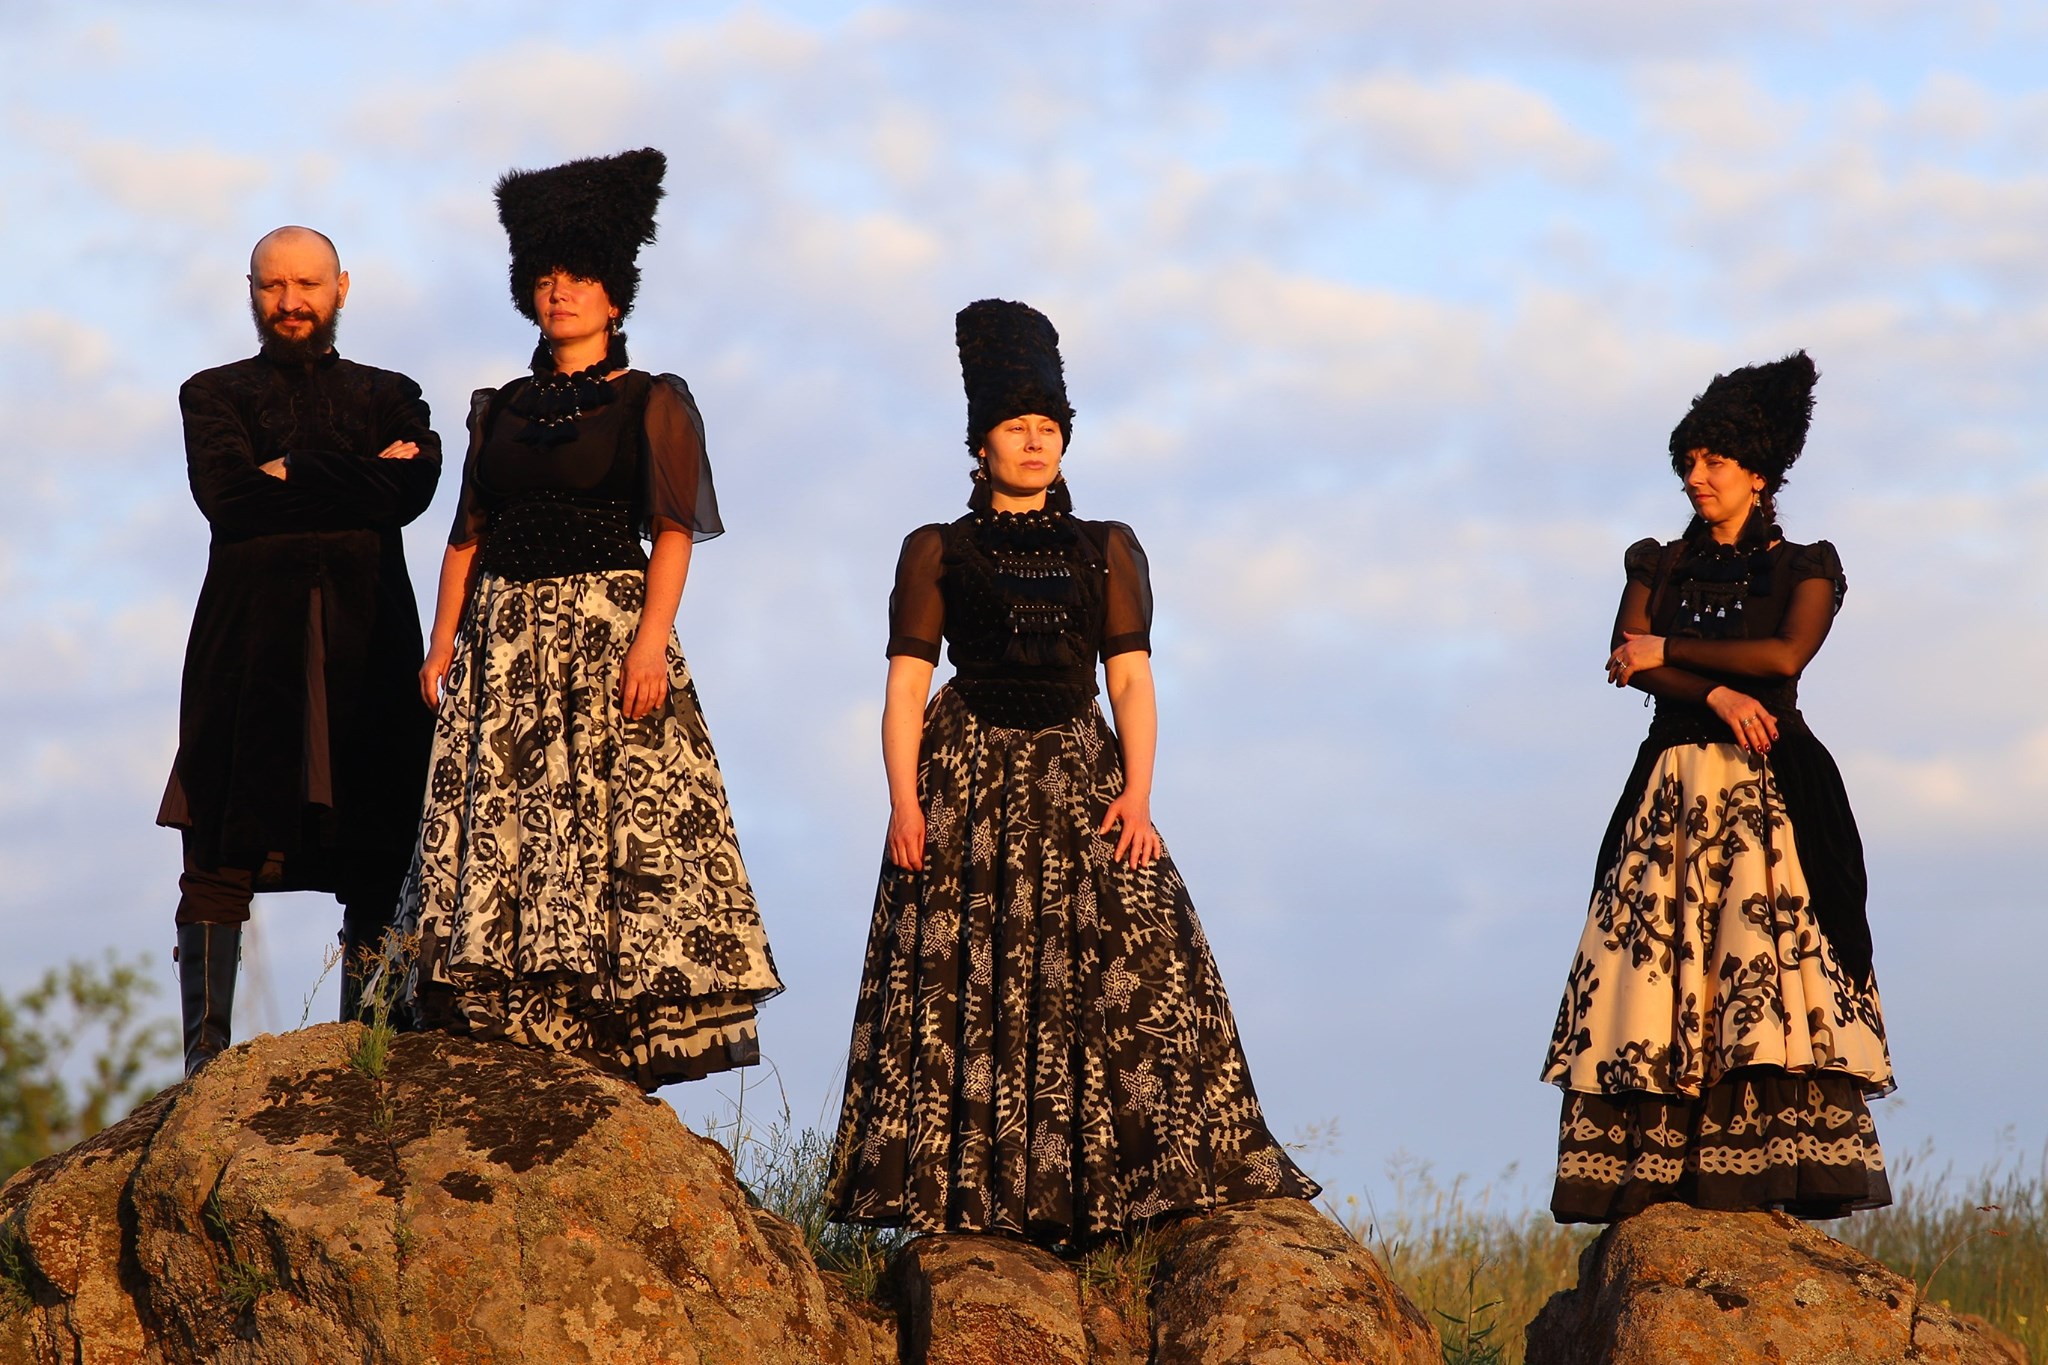 City of Madison to declare July 19 as DakhaBrakha Day